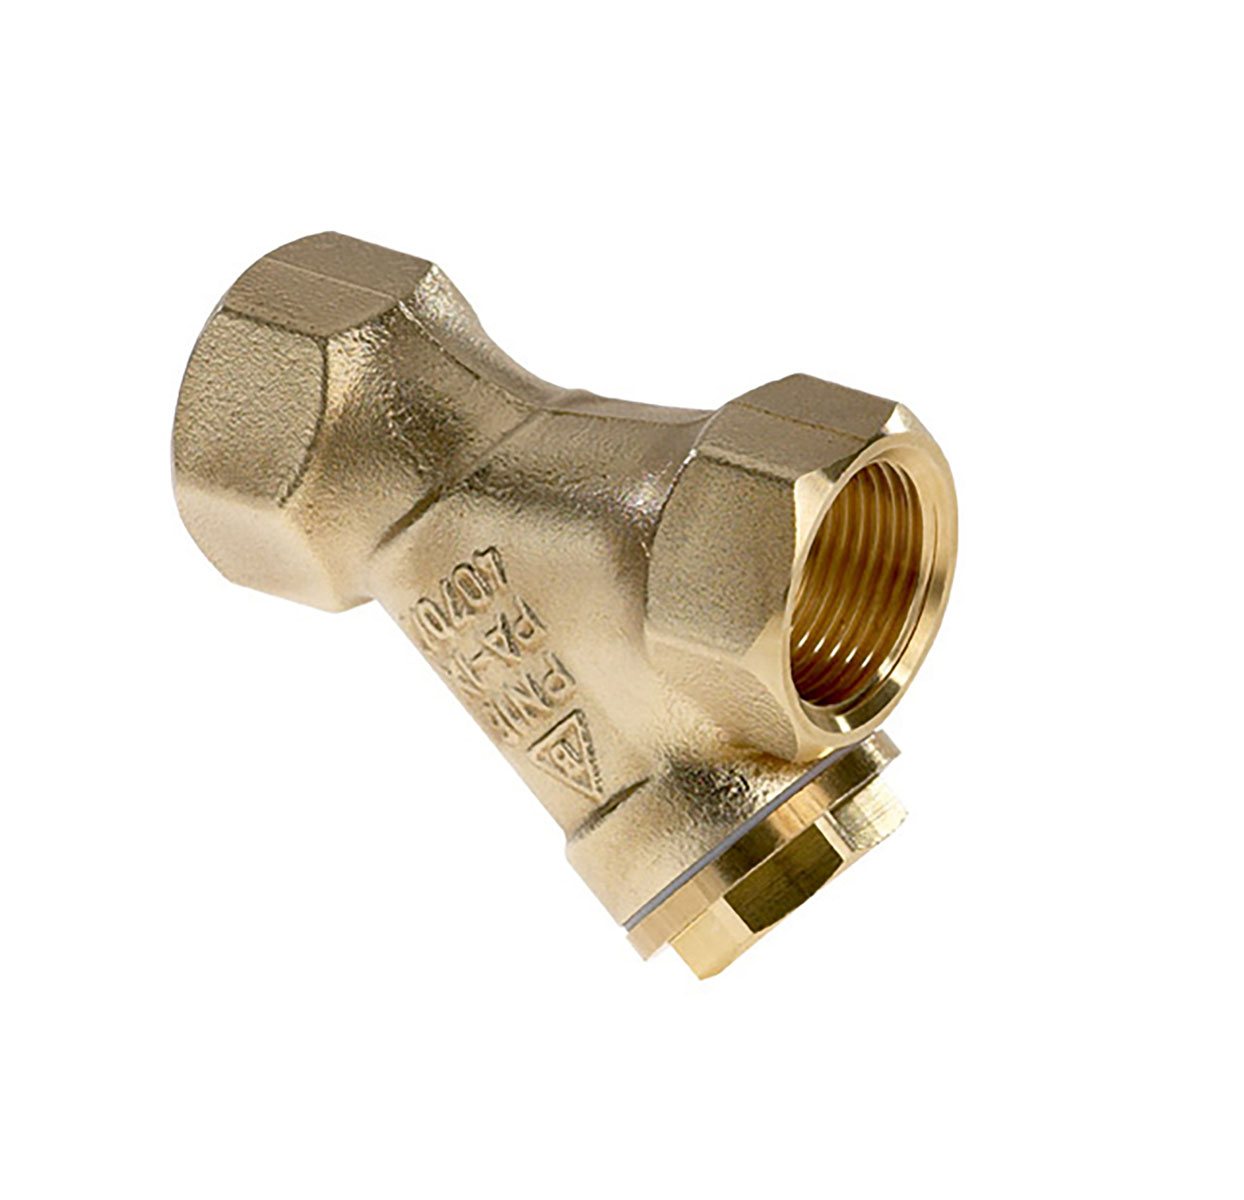 1450250 - CR-Brass Strainer Strainer with PTFE-sealing (Teflon)